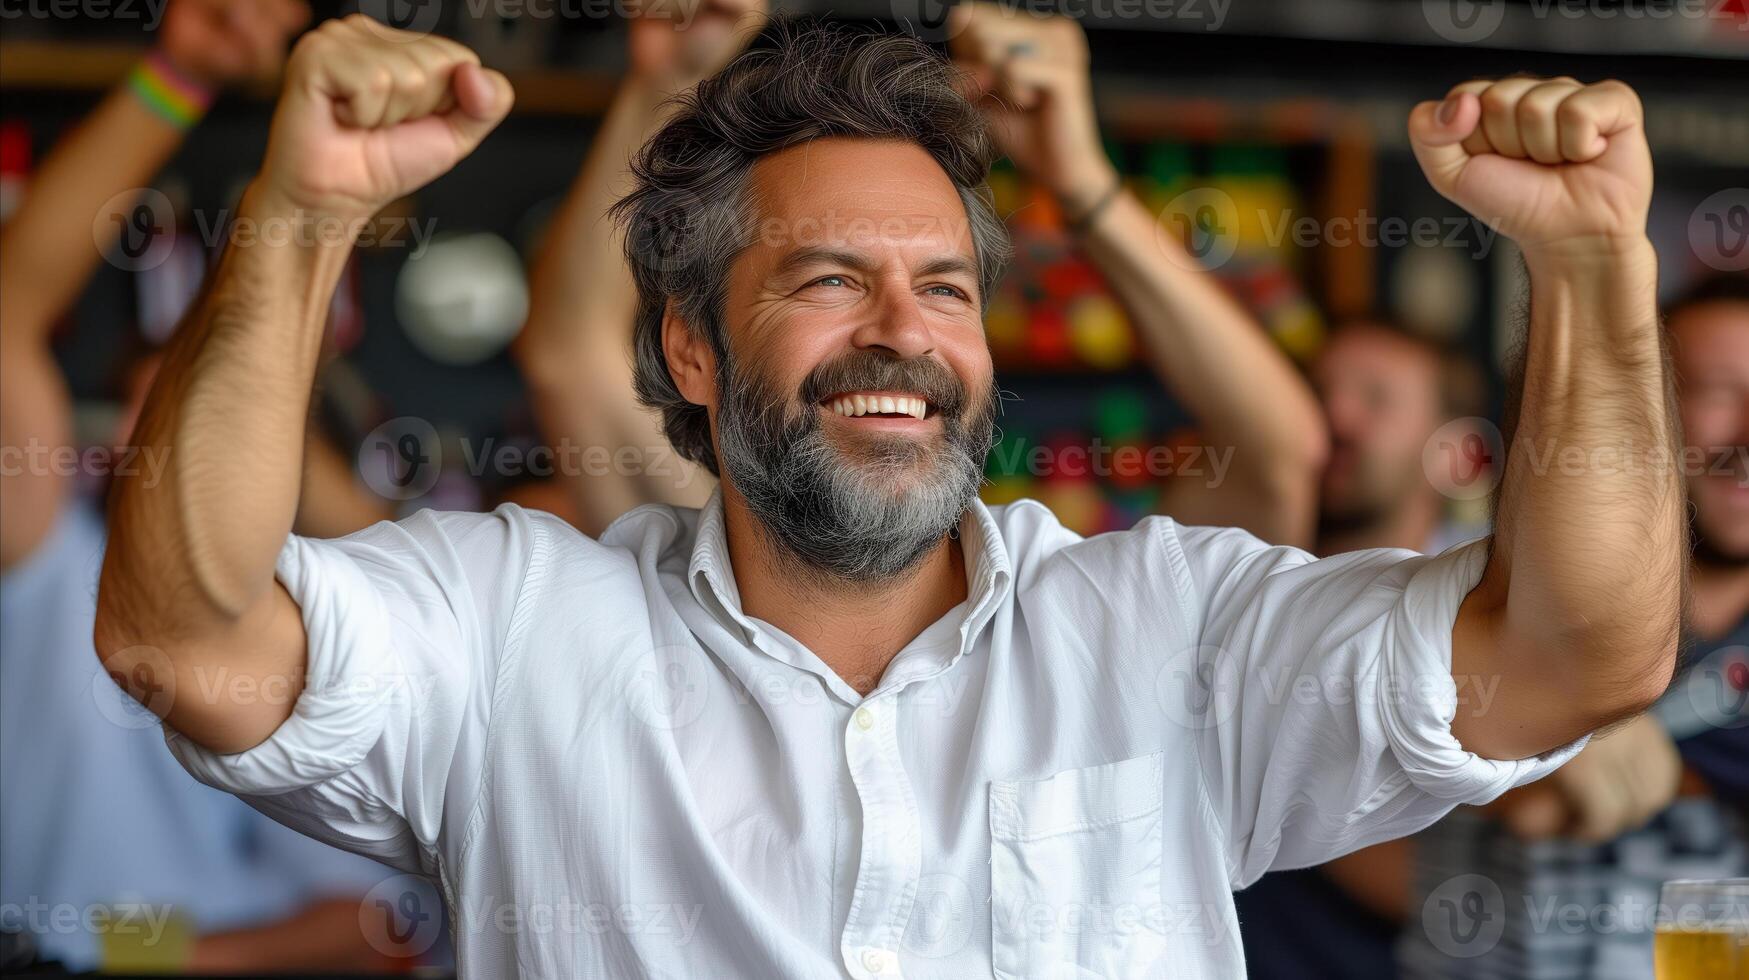 AI generated Joyful man celebrating victory at sports event with raised fists photo